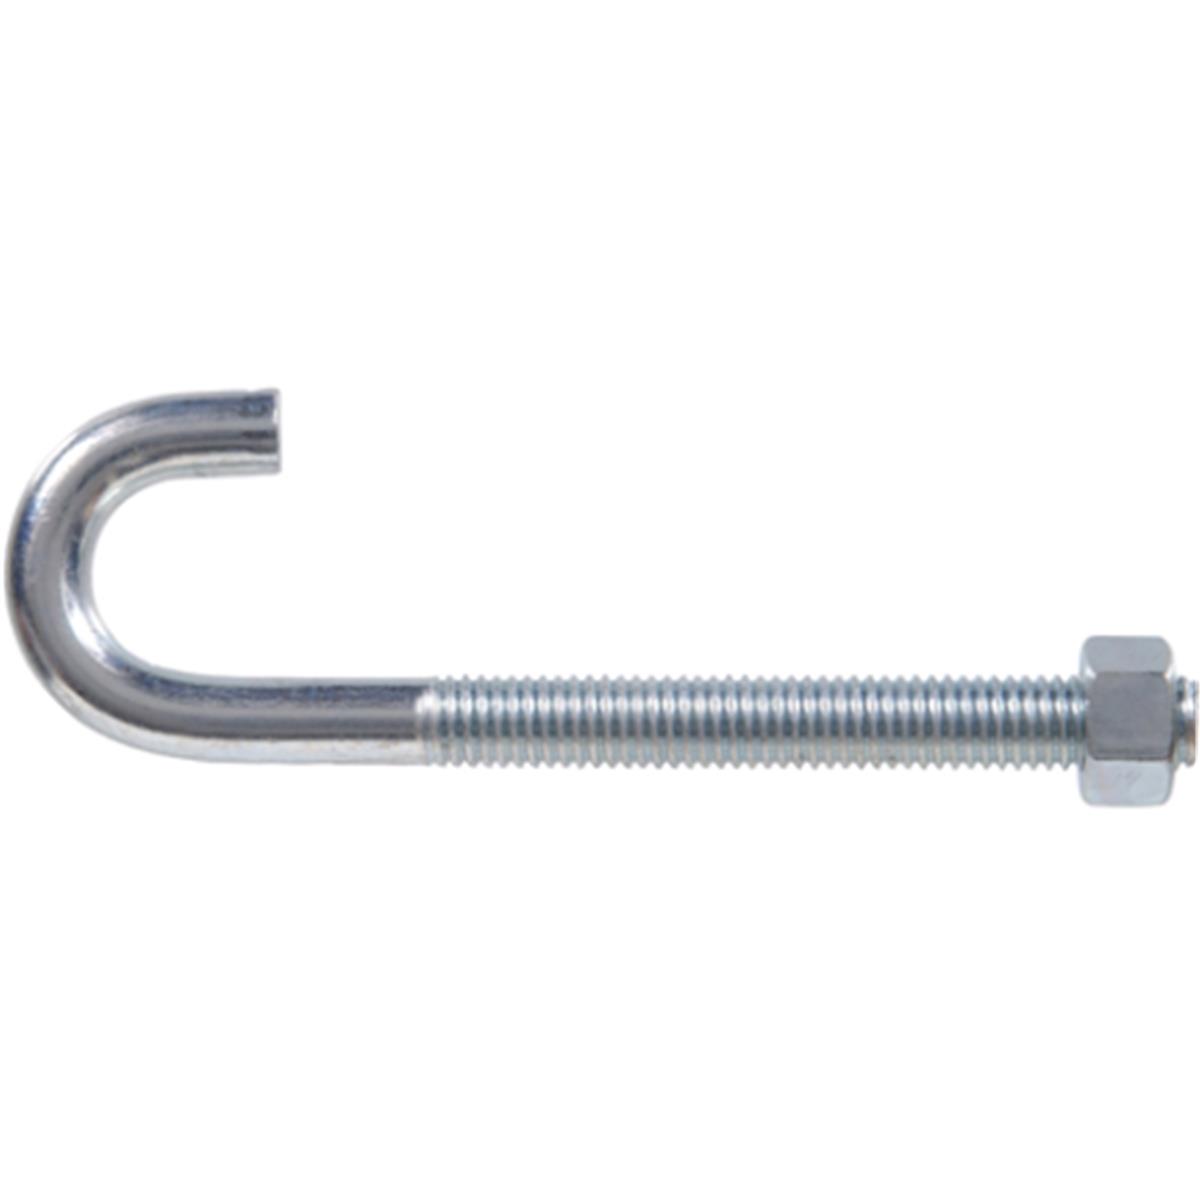 0.25-20 X 2.31 In. Zinc Plated J-bolt With Nut, Pack Of 25